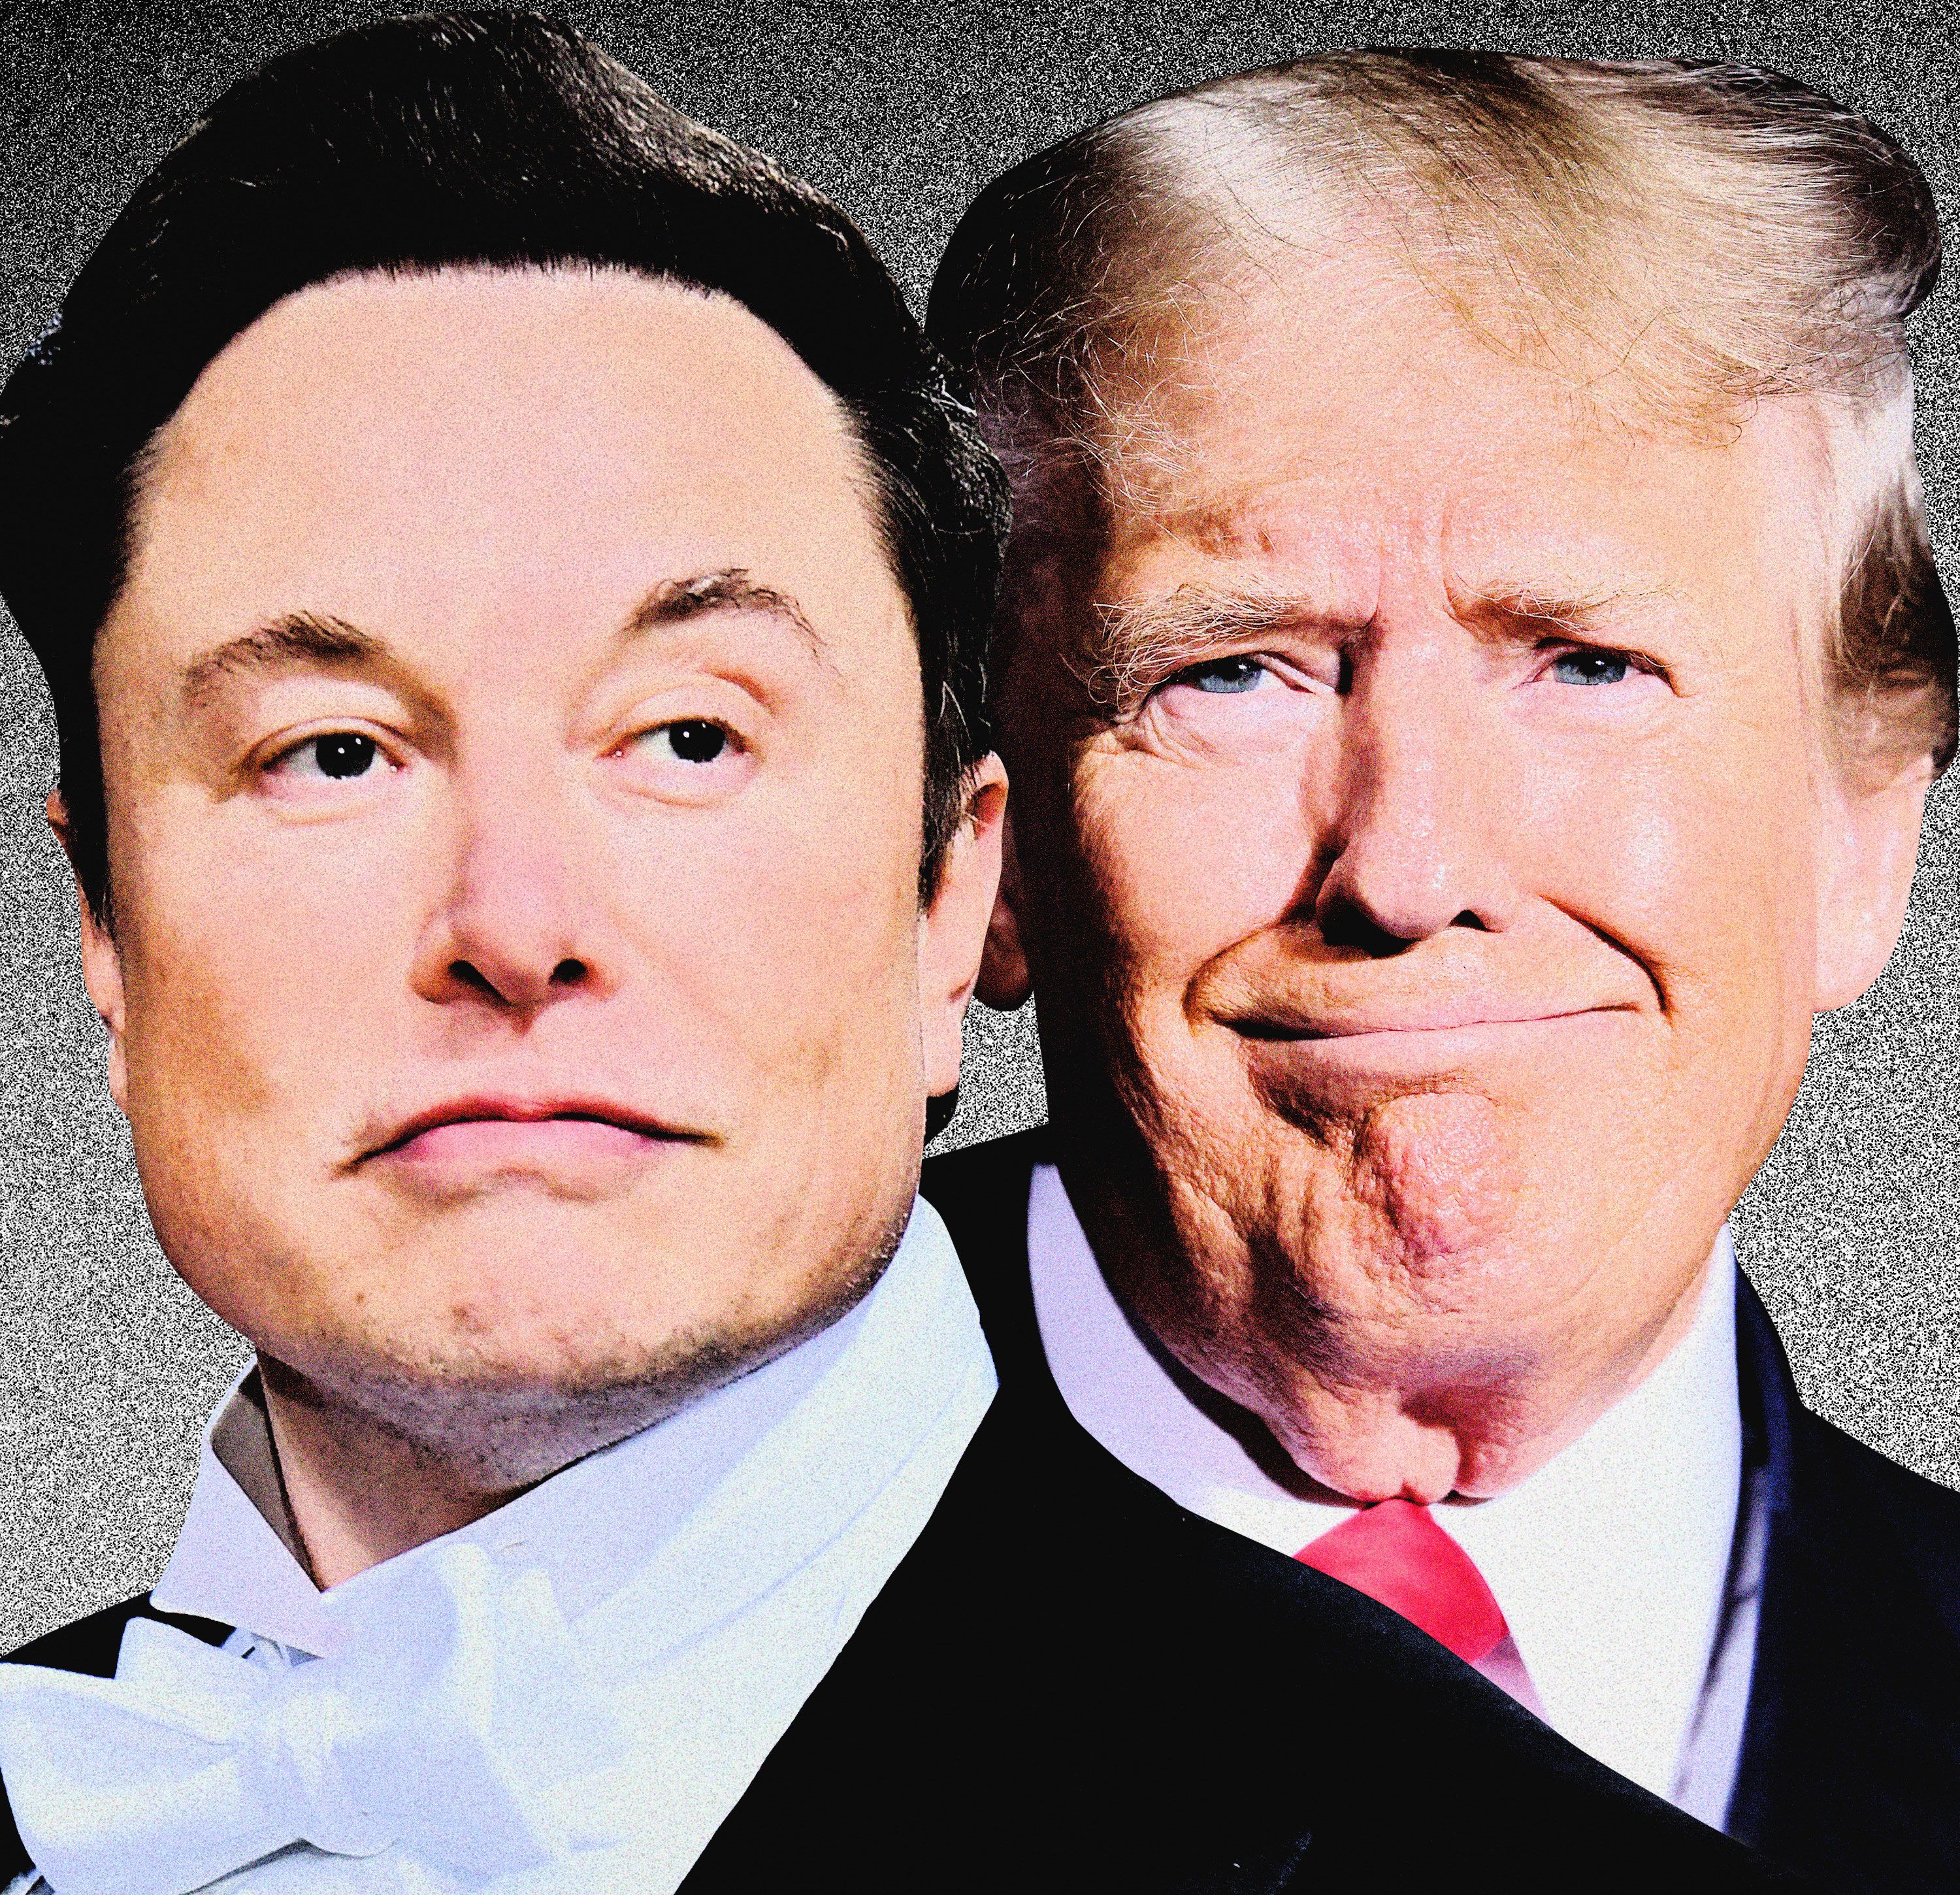 Elon Musk's Politics Are About As Complicated As Trump's